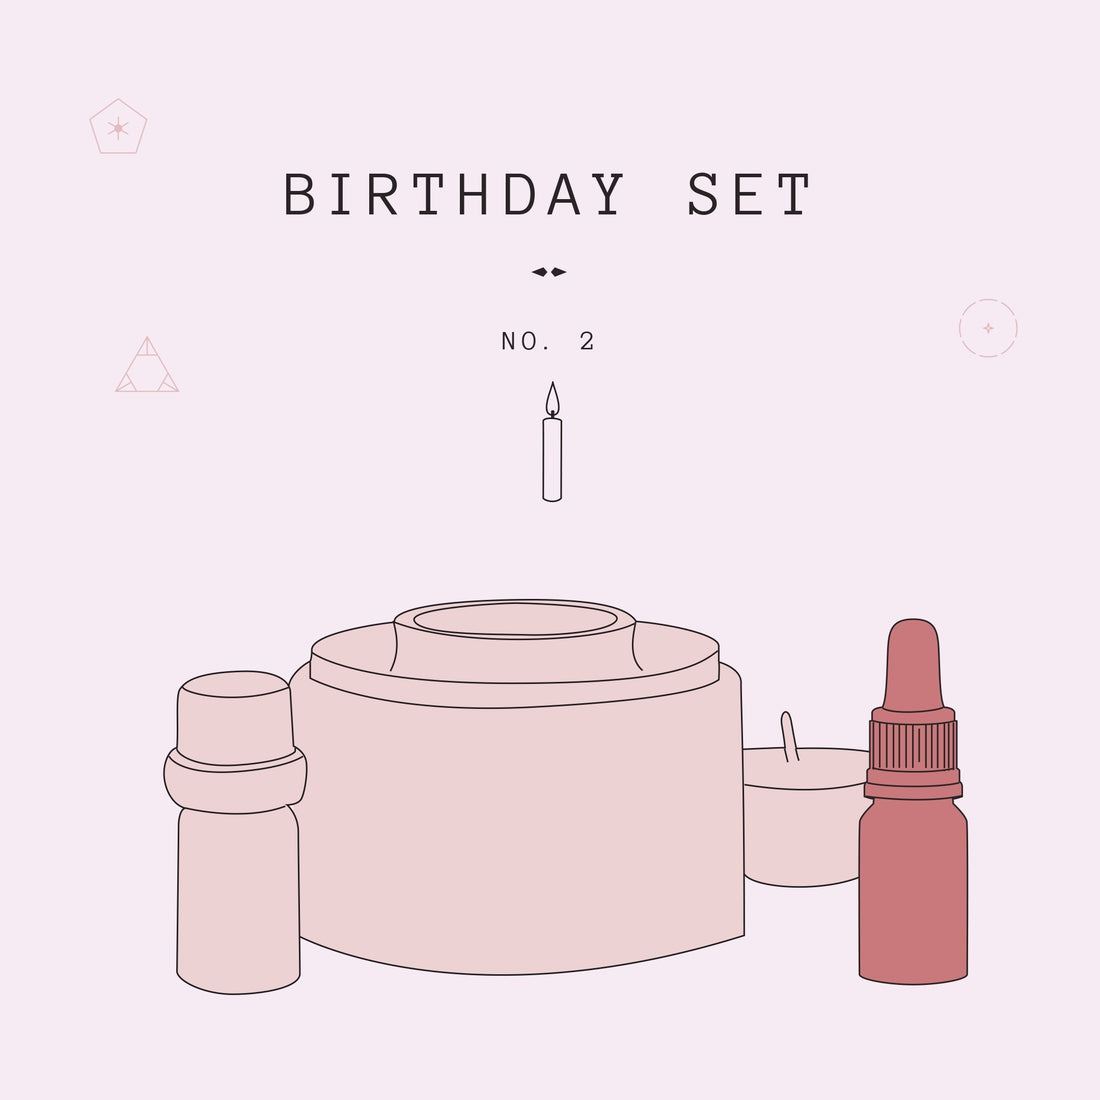 Birthday 2 Gift Set is a very special gift. This stone incense burner is something that people can cherish for a lifetime.  PRODUCTS INCLUDED:  ・Addition Studio Asteroid Oil Burner Travertine & Lavender Essential Oil ・Feather & Seed Sunday Essential Oil, 10ml